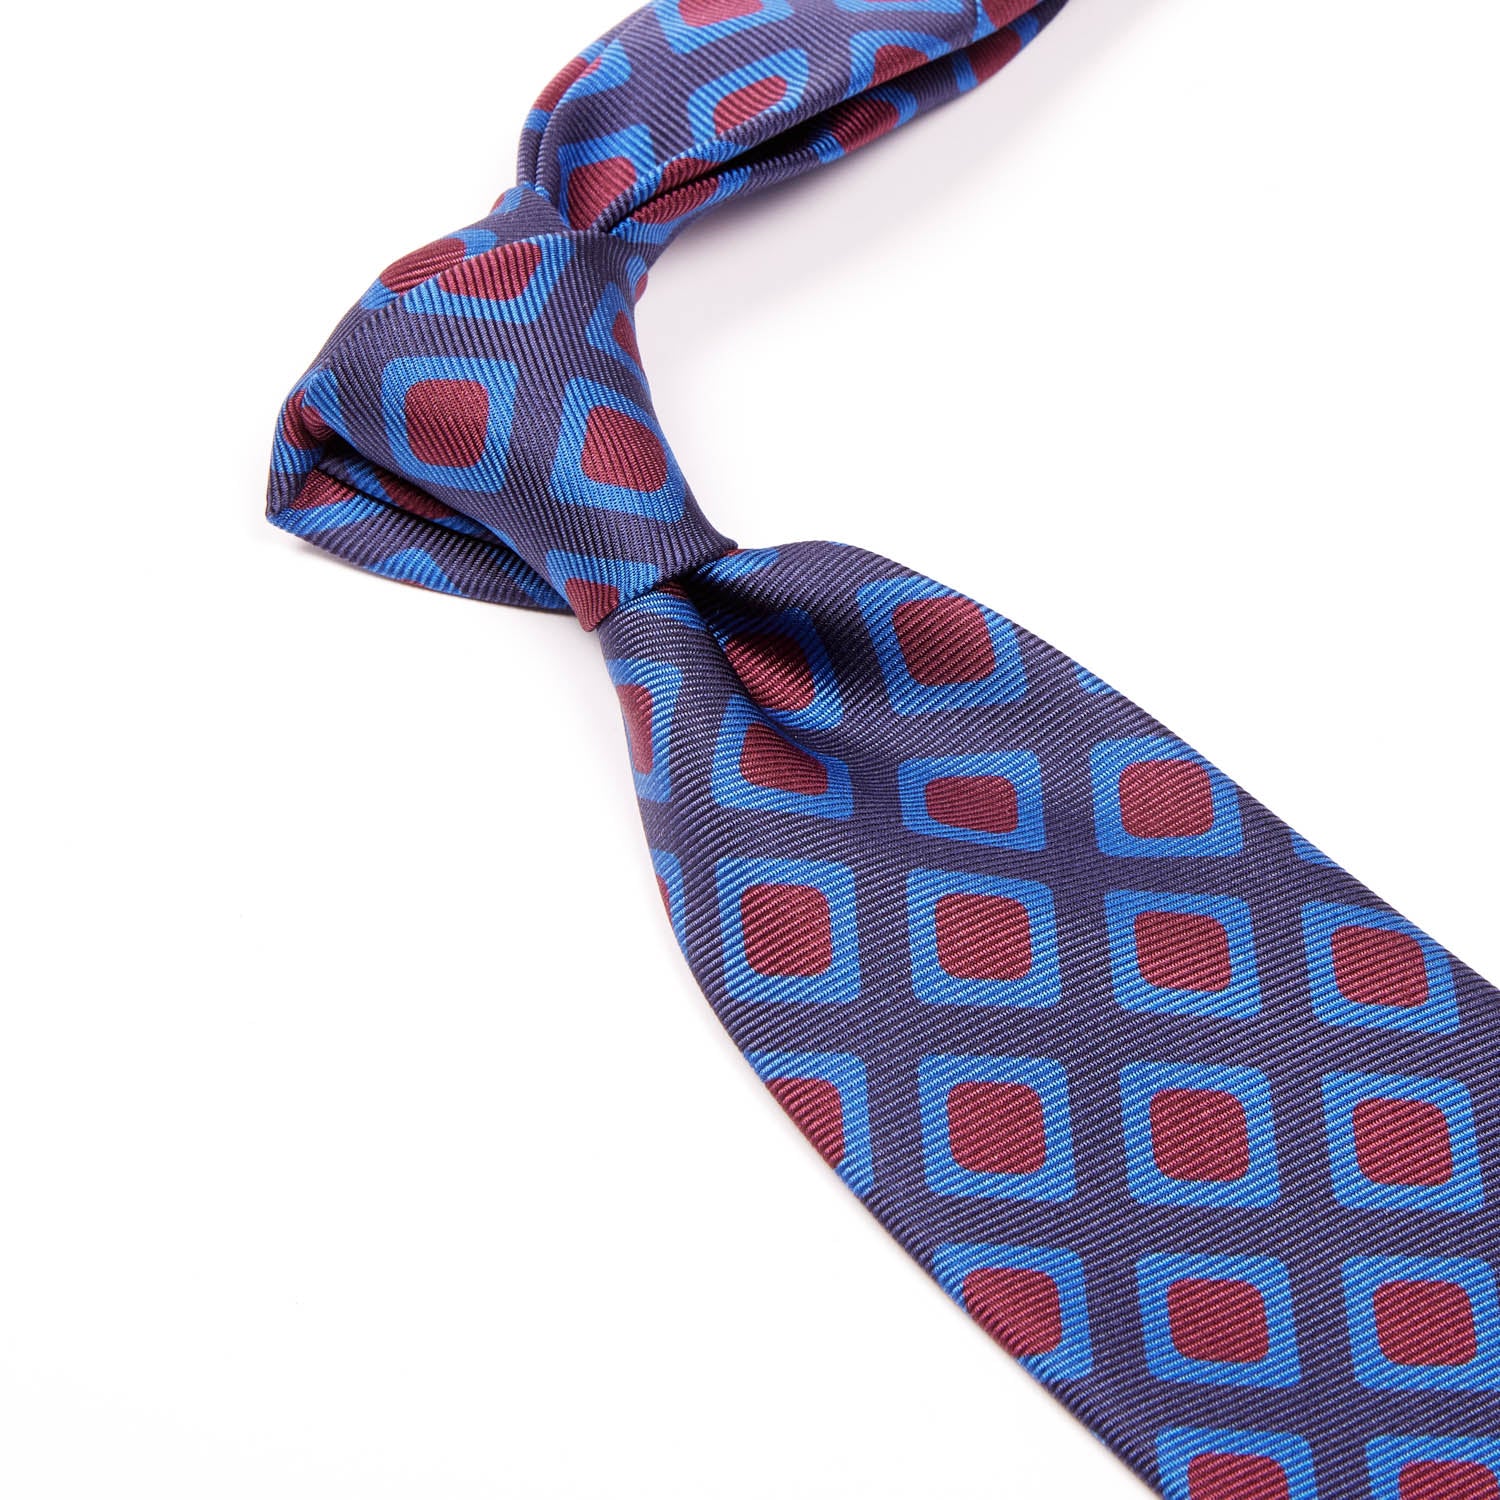 A Sovereign Grade Navy 50 oz Art Deco Tie, 150 cm with blue and red squares on a white background from KirbyAllison.com.